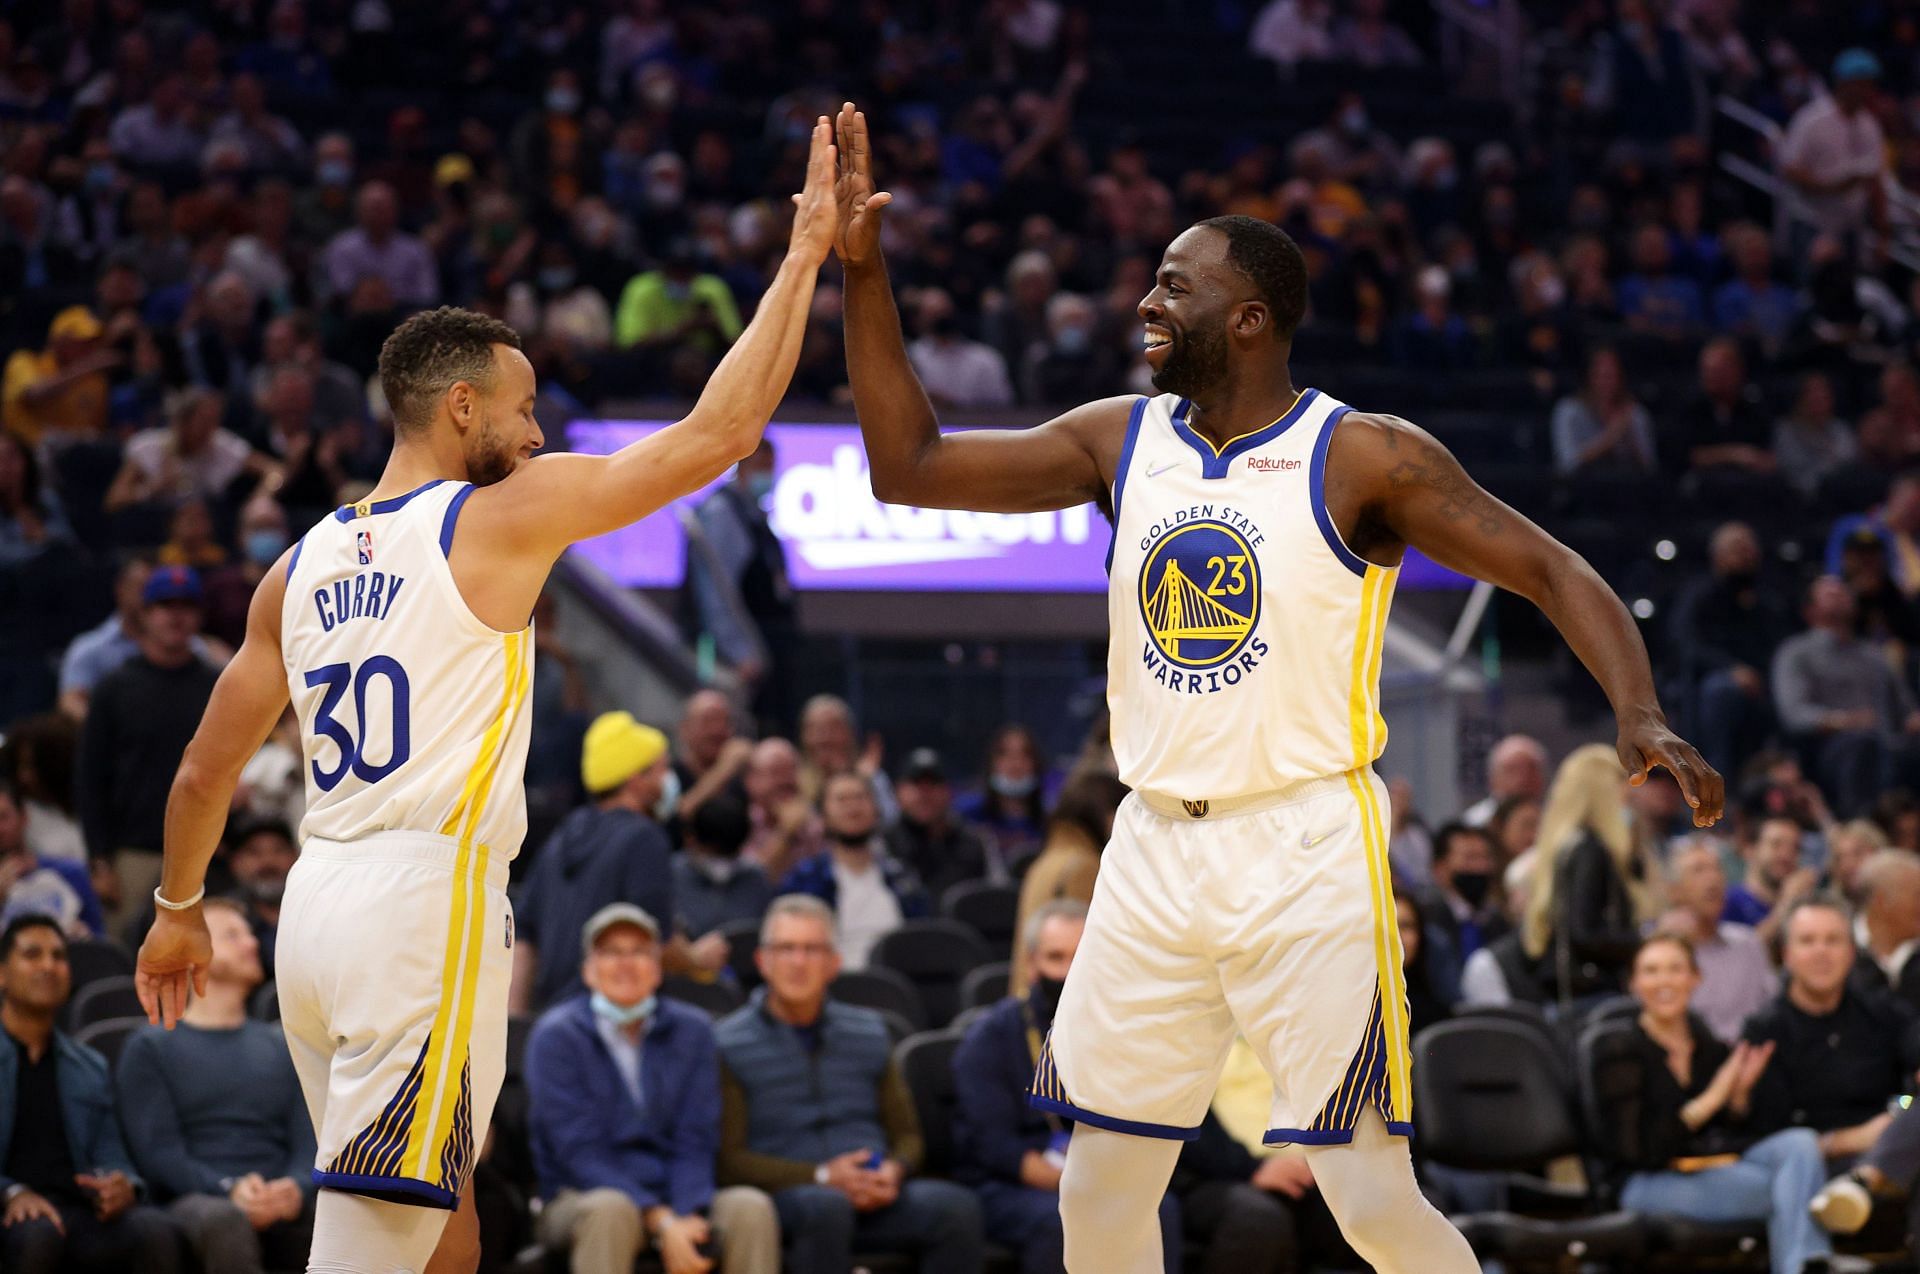 Steph Curry and Draymond Green high-five each other during an NBA game